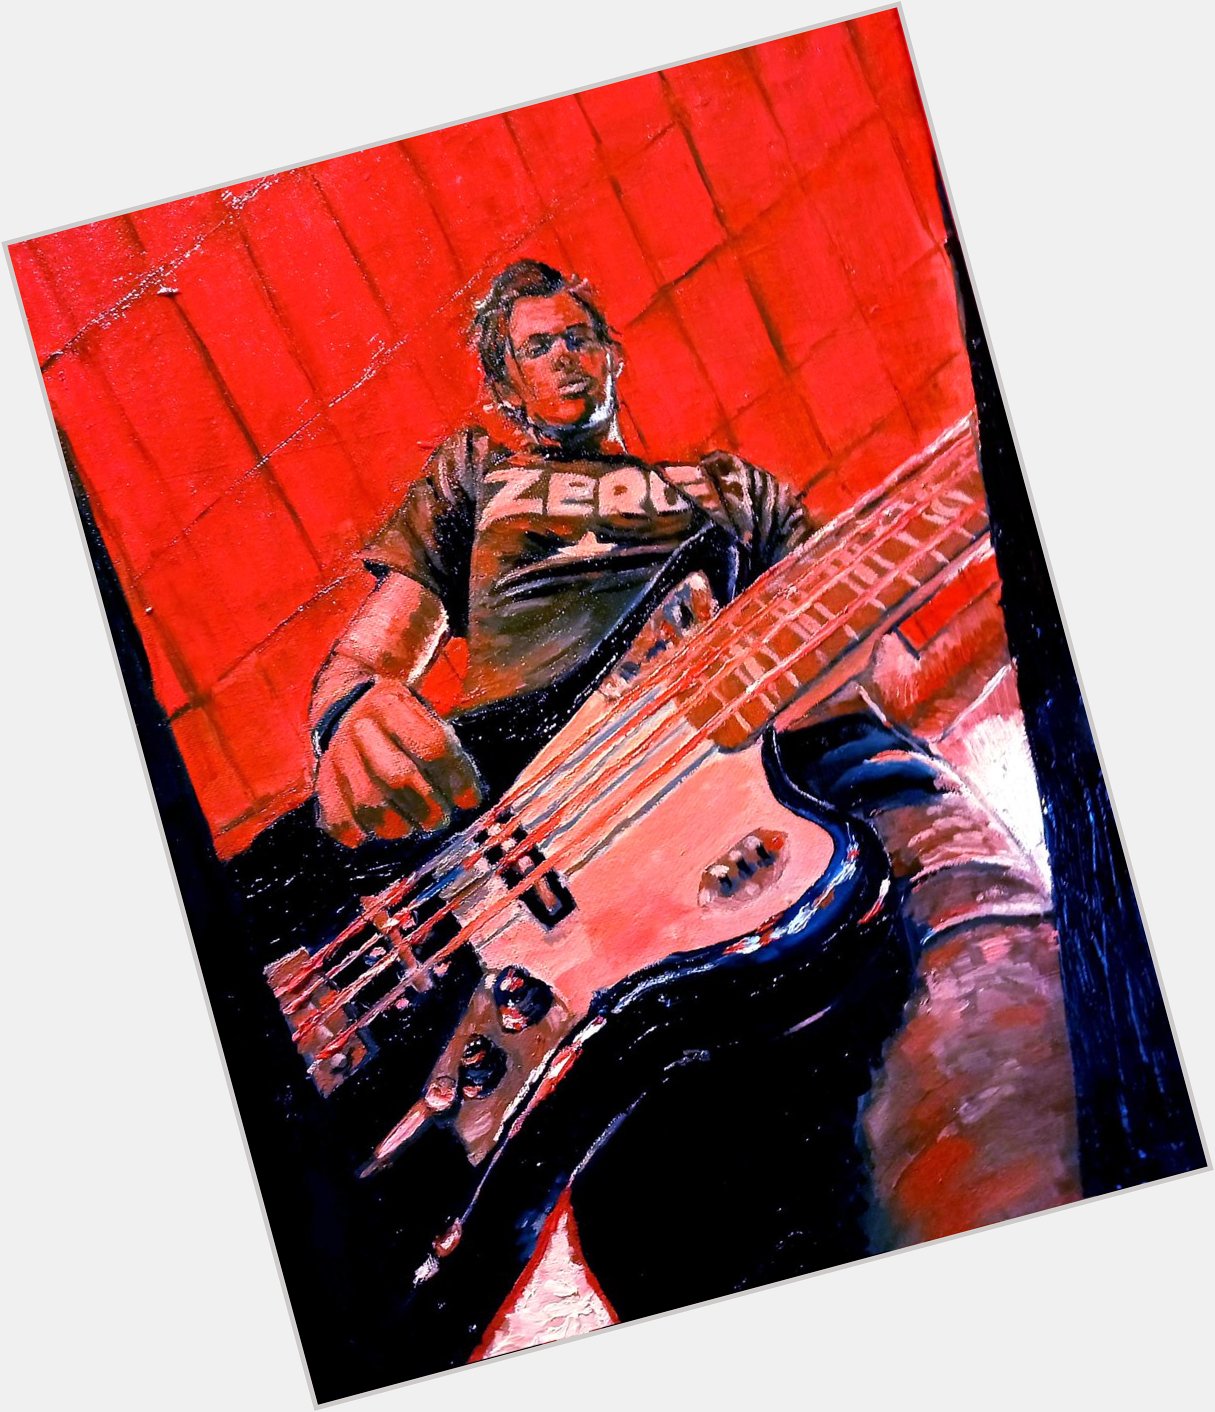 Happy birthday mikey way <333 bring back this oil painting I did a while ago 